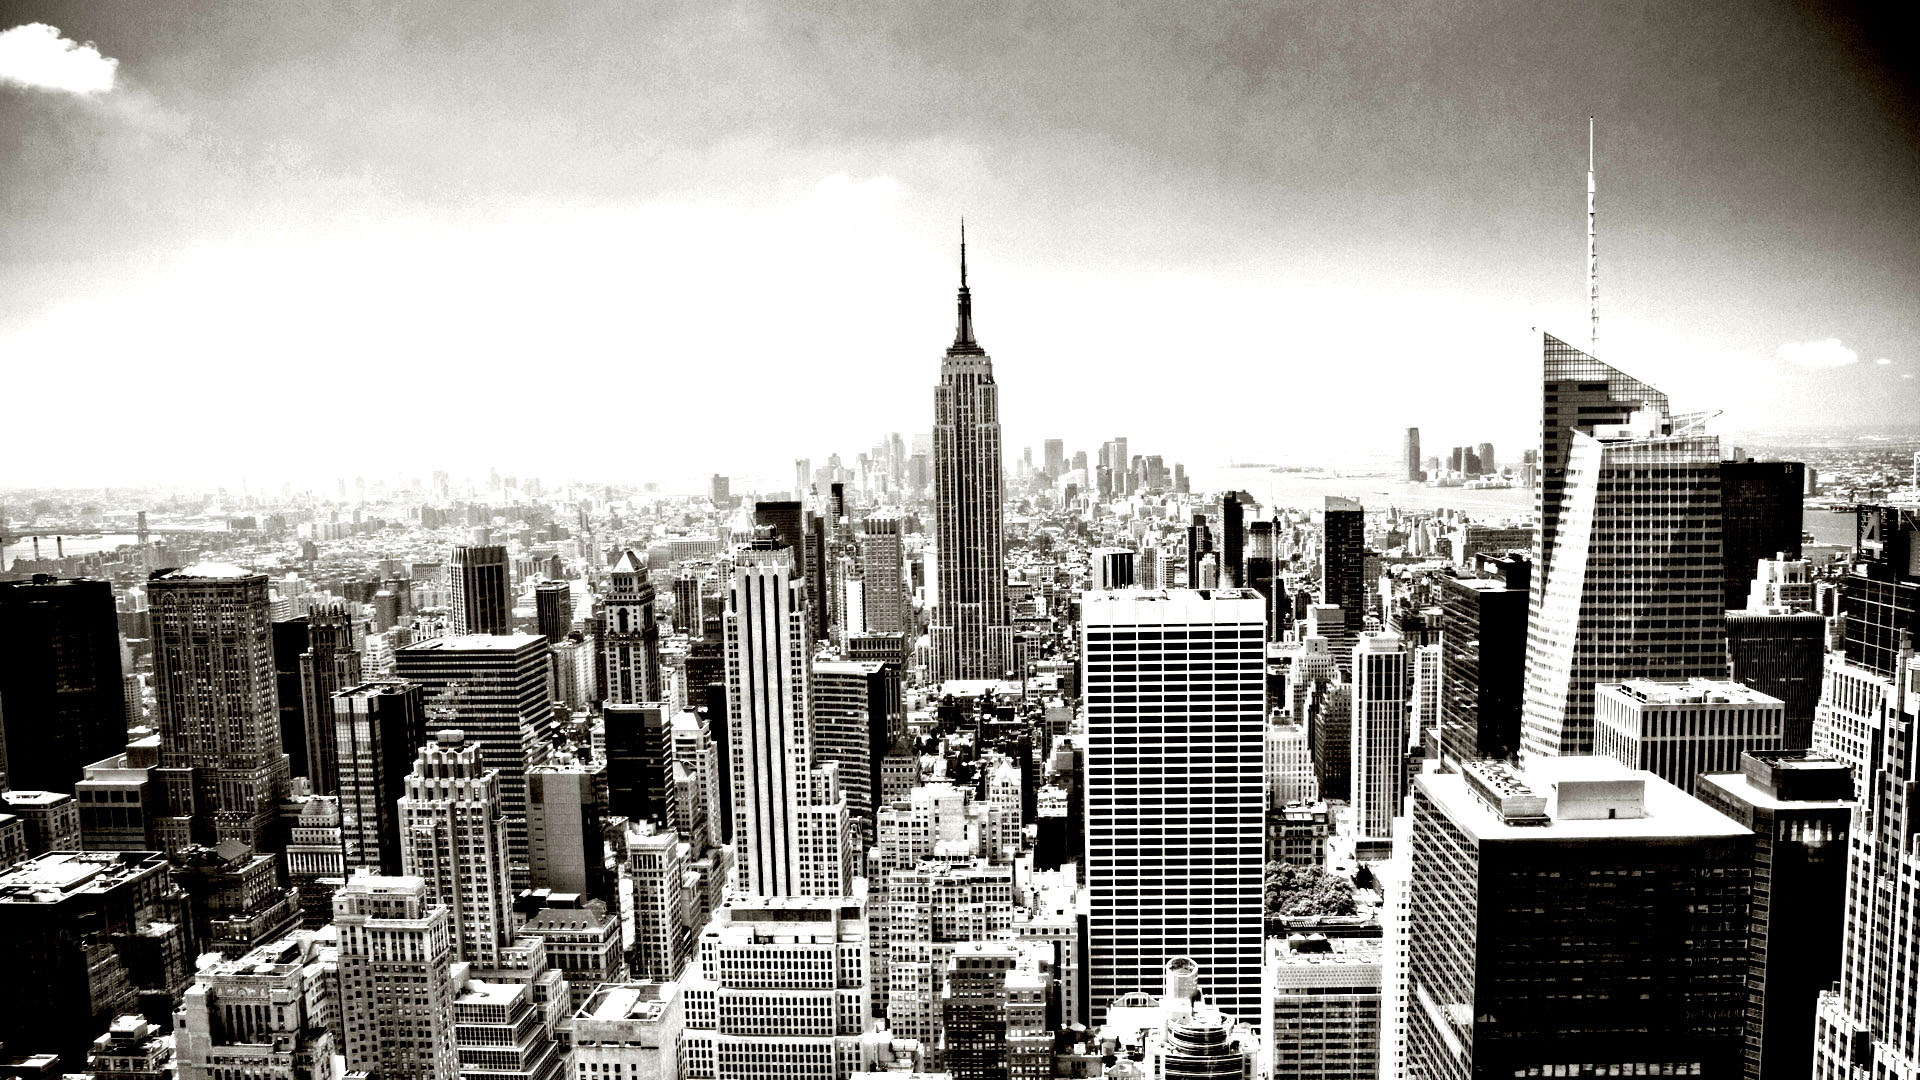 Aerial view of New York, with in its center the Empire State Building.